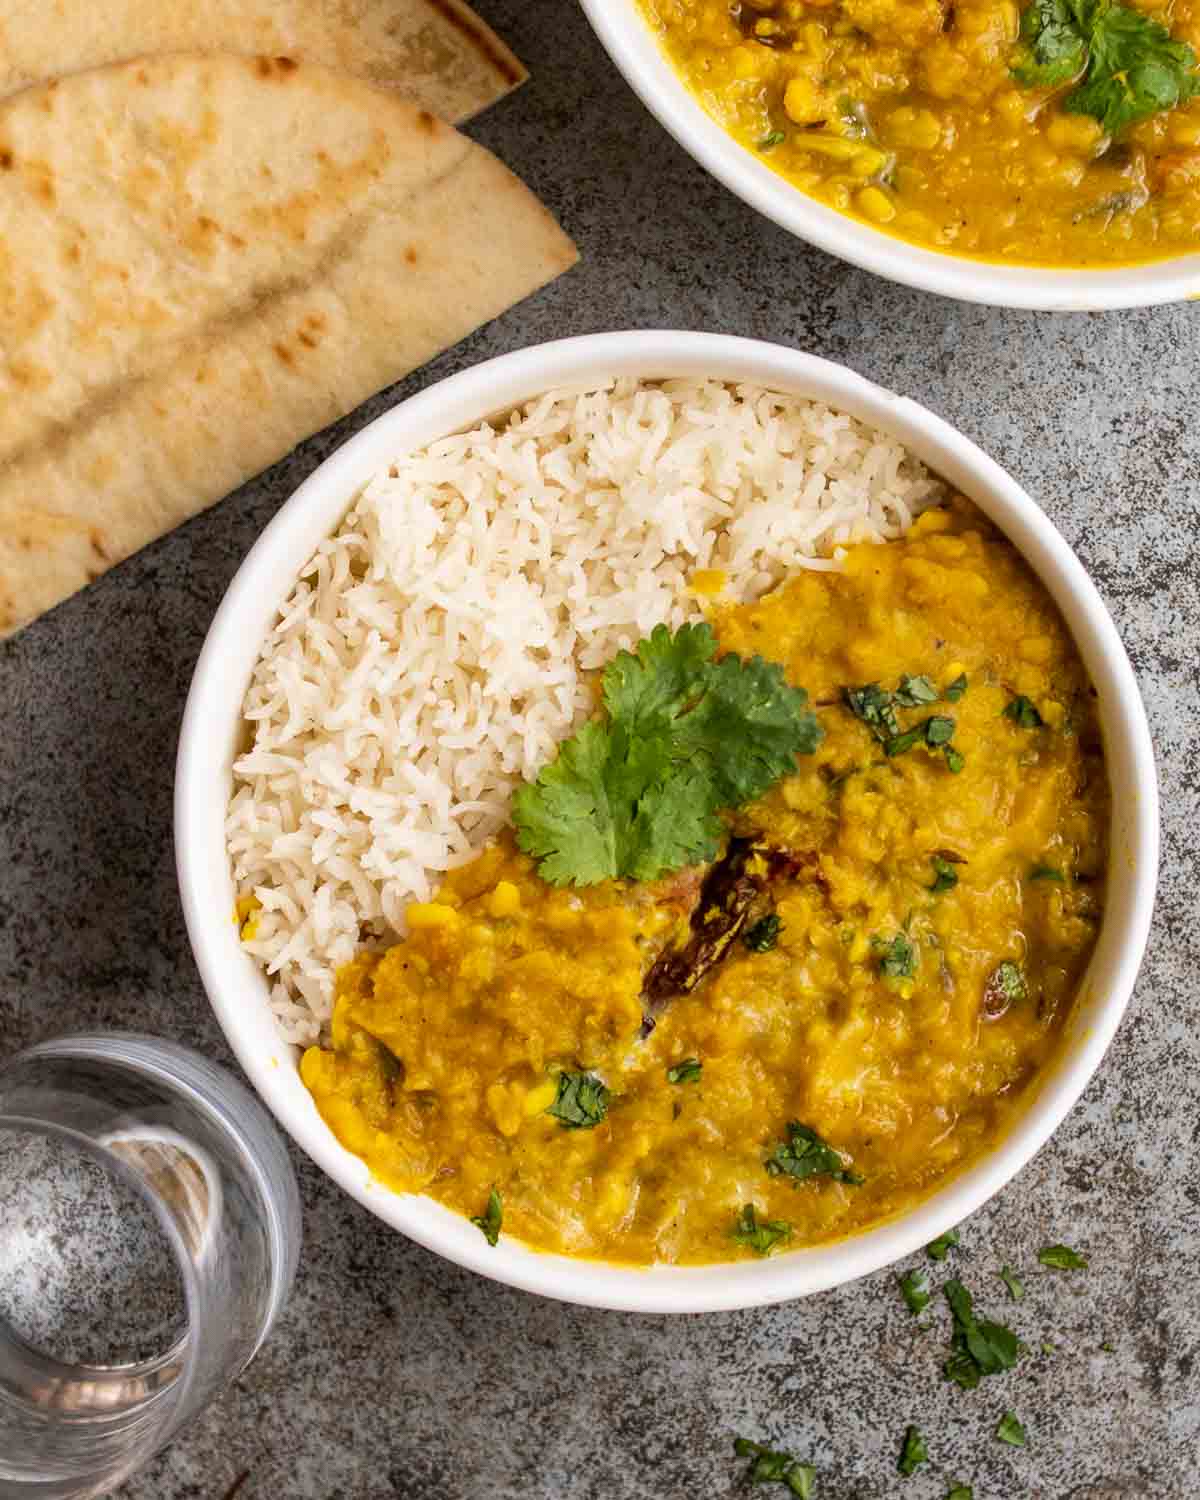 A bowl filled with half rice and half moong masoor dal, topped with fresh cilantro.